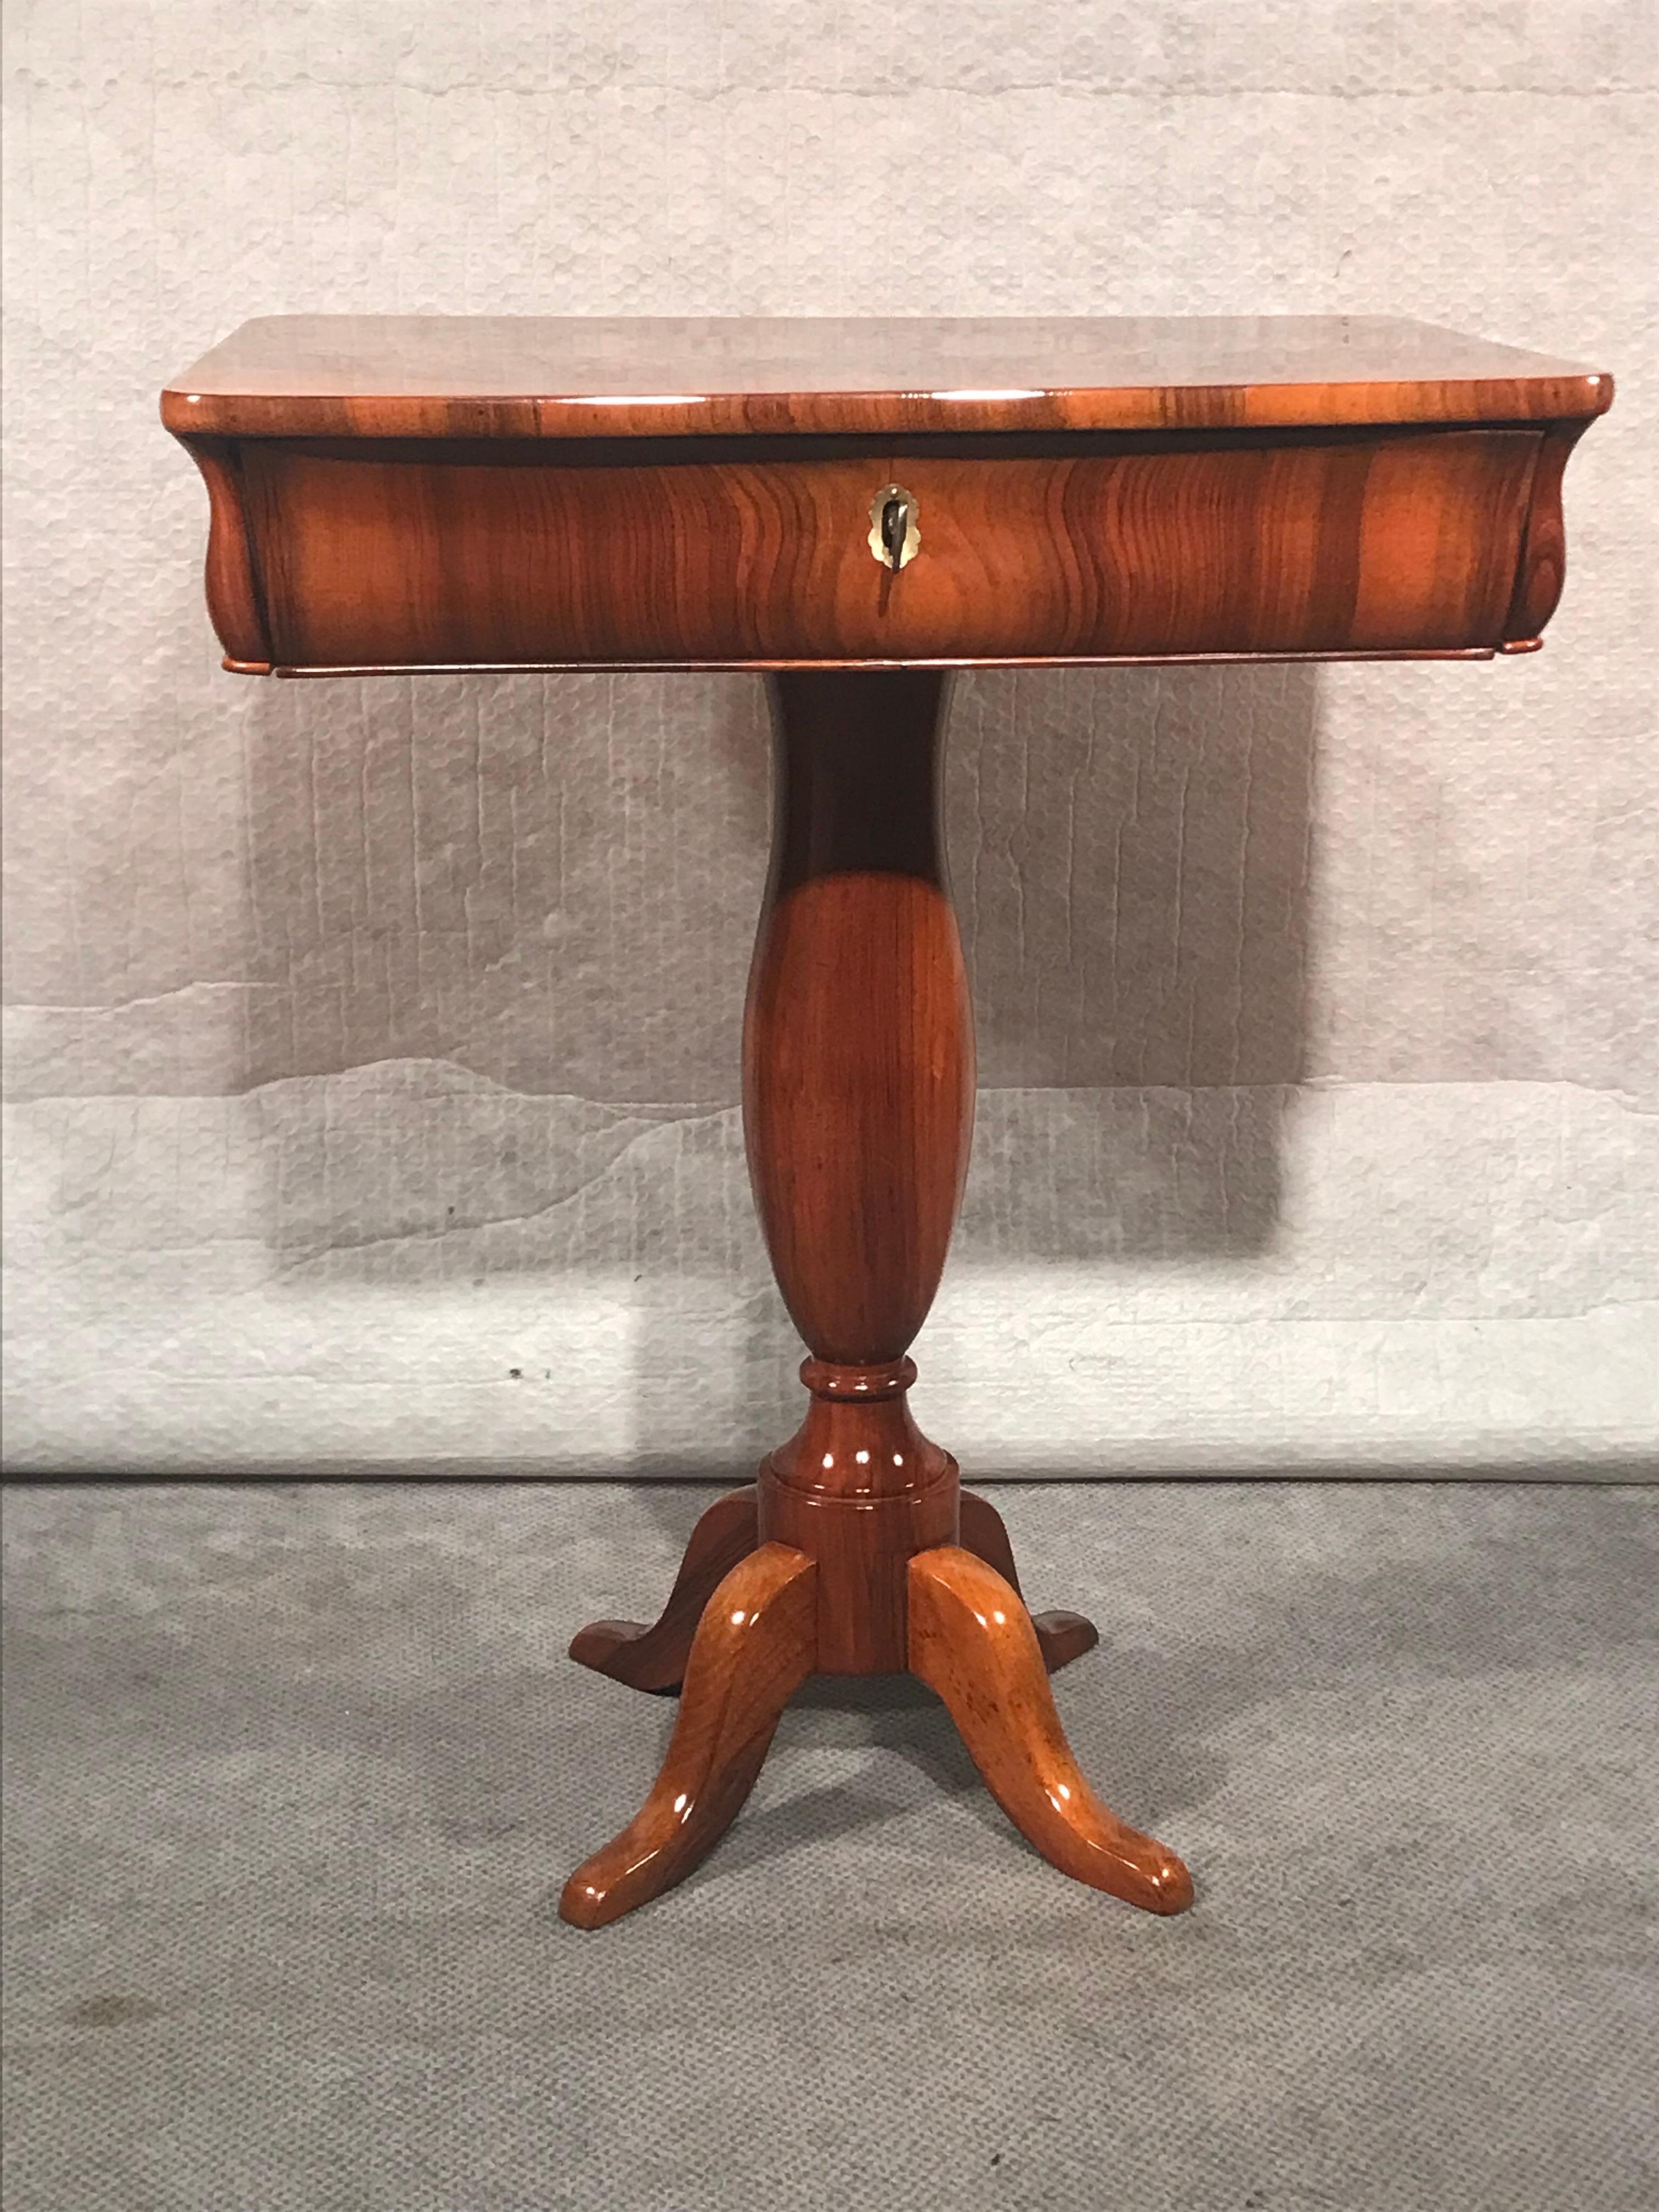 This unique Biedermeier sewing table comes from Southern Germany and dates back to 1830. The table stands on a central foot and has one drawer. The top stands out for its very pretty walnut veneer. It comes in very good refinished condition with a